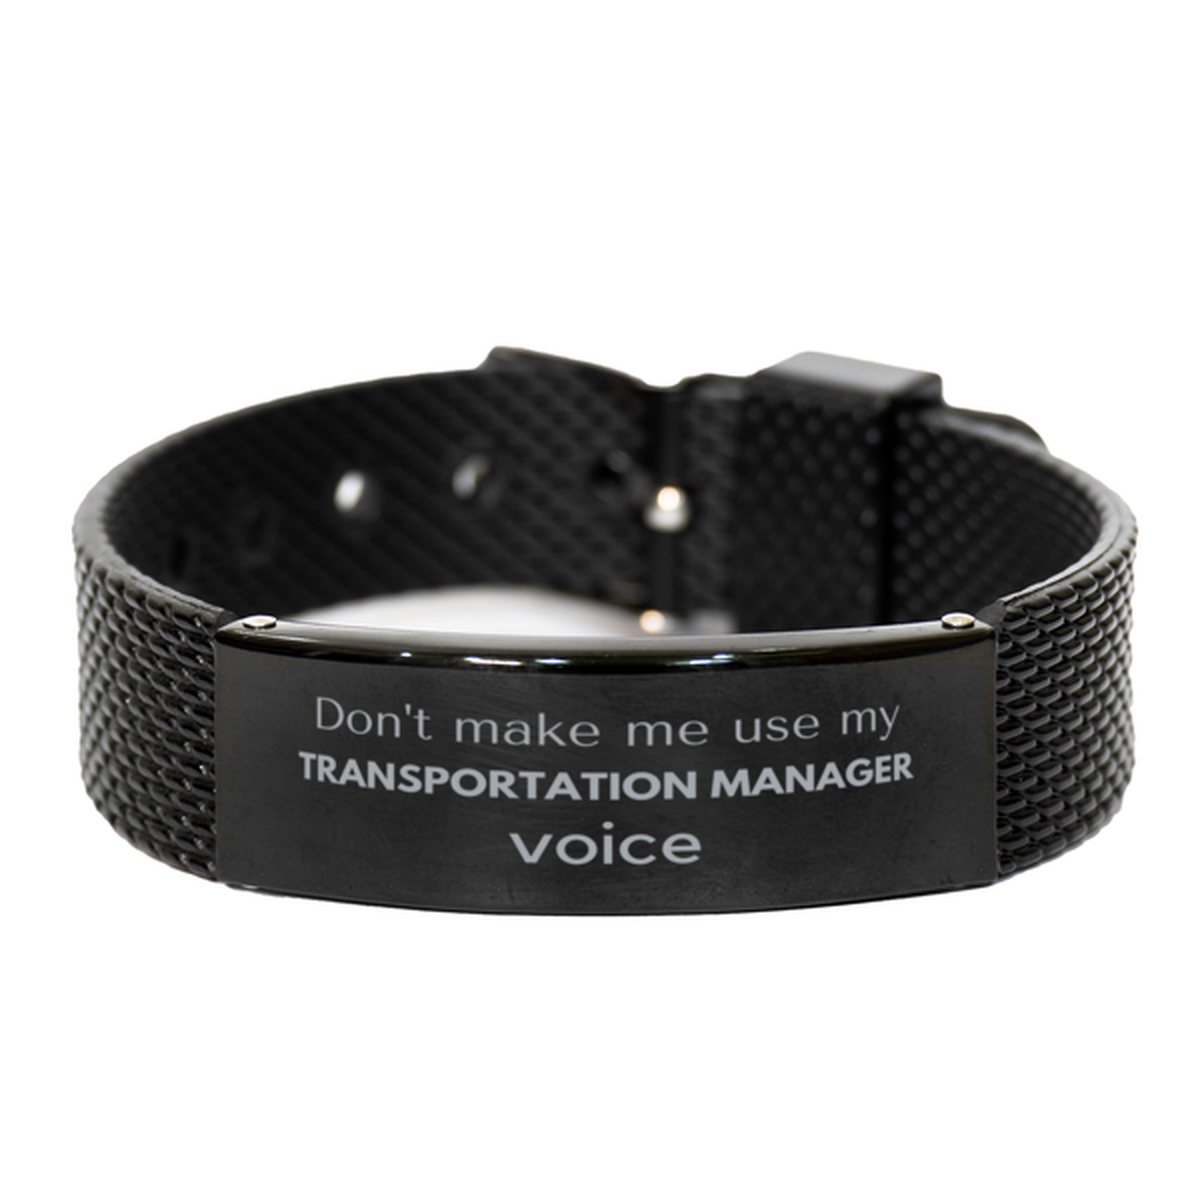 Don't make me use my Transportation Manager voice, Sarcasm Transportation Manager Gifts, Christmas Transportation Manager Black Shark Mesh Bracelet Birthday Unique Gifts For Transportation Manager Coworkers, Men, Women, Colleague, Friends